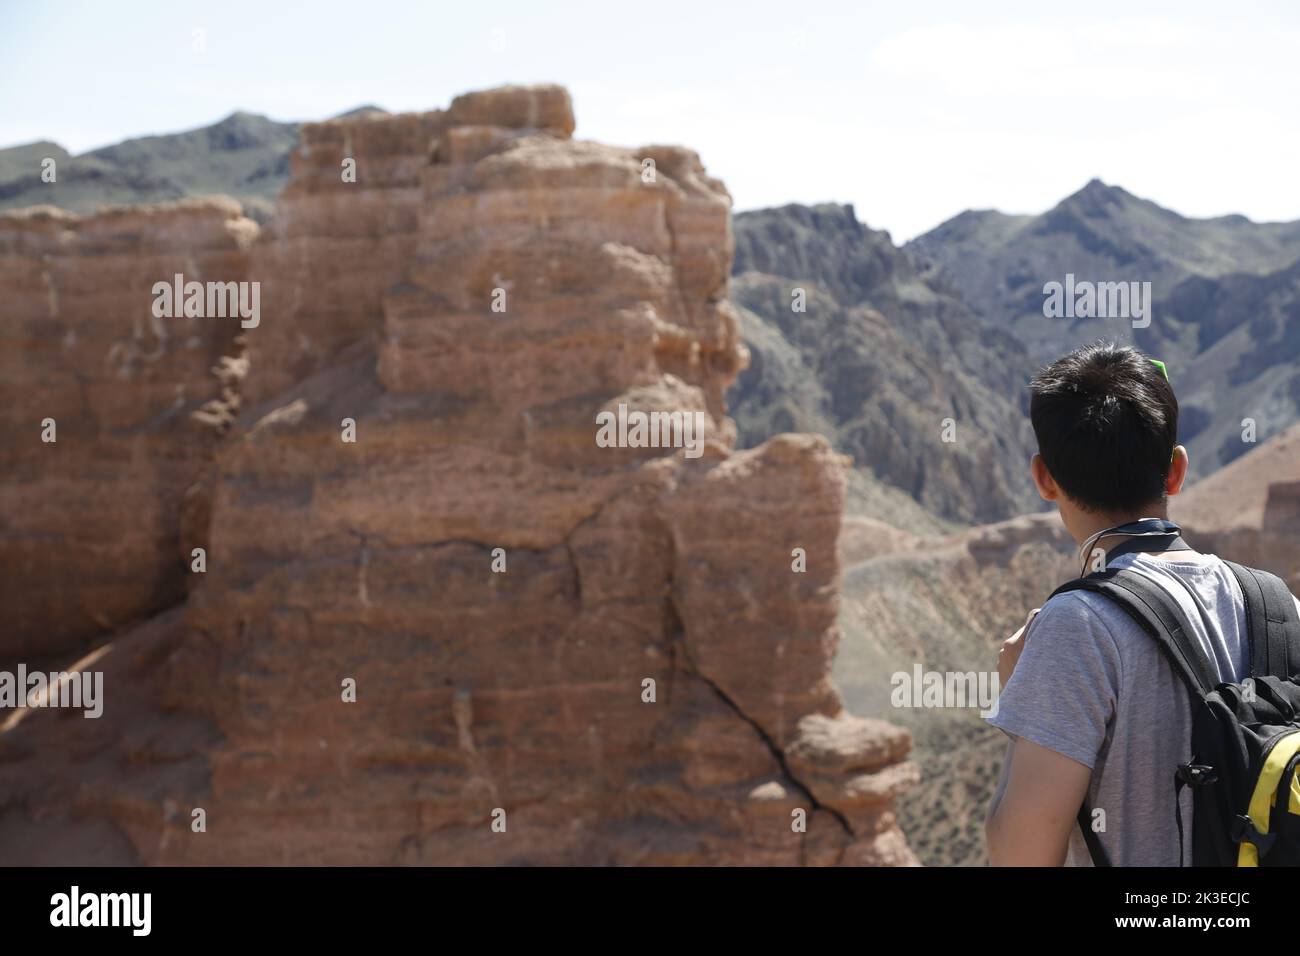 Male with backpack (a tourist?), seen from the back, looking at the impressive,majestic landscape in Charyn Canyon National Park, Kazakhstan Stock Photo